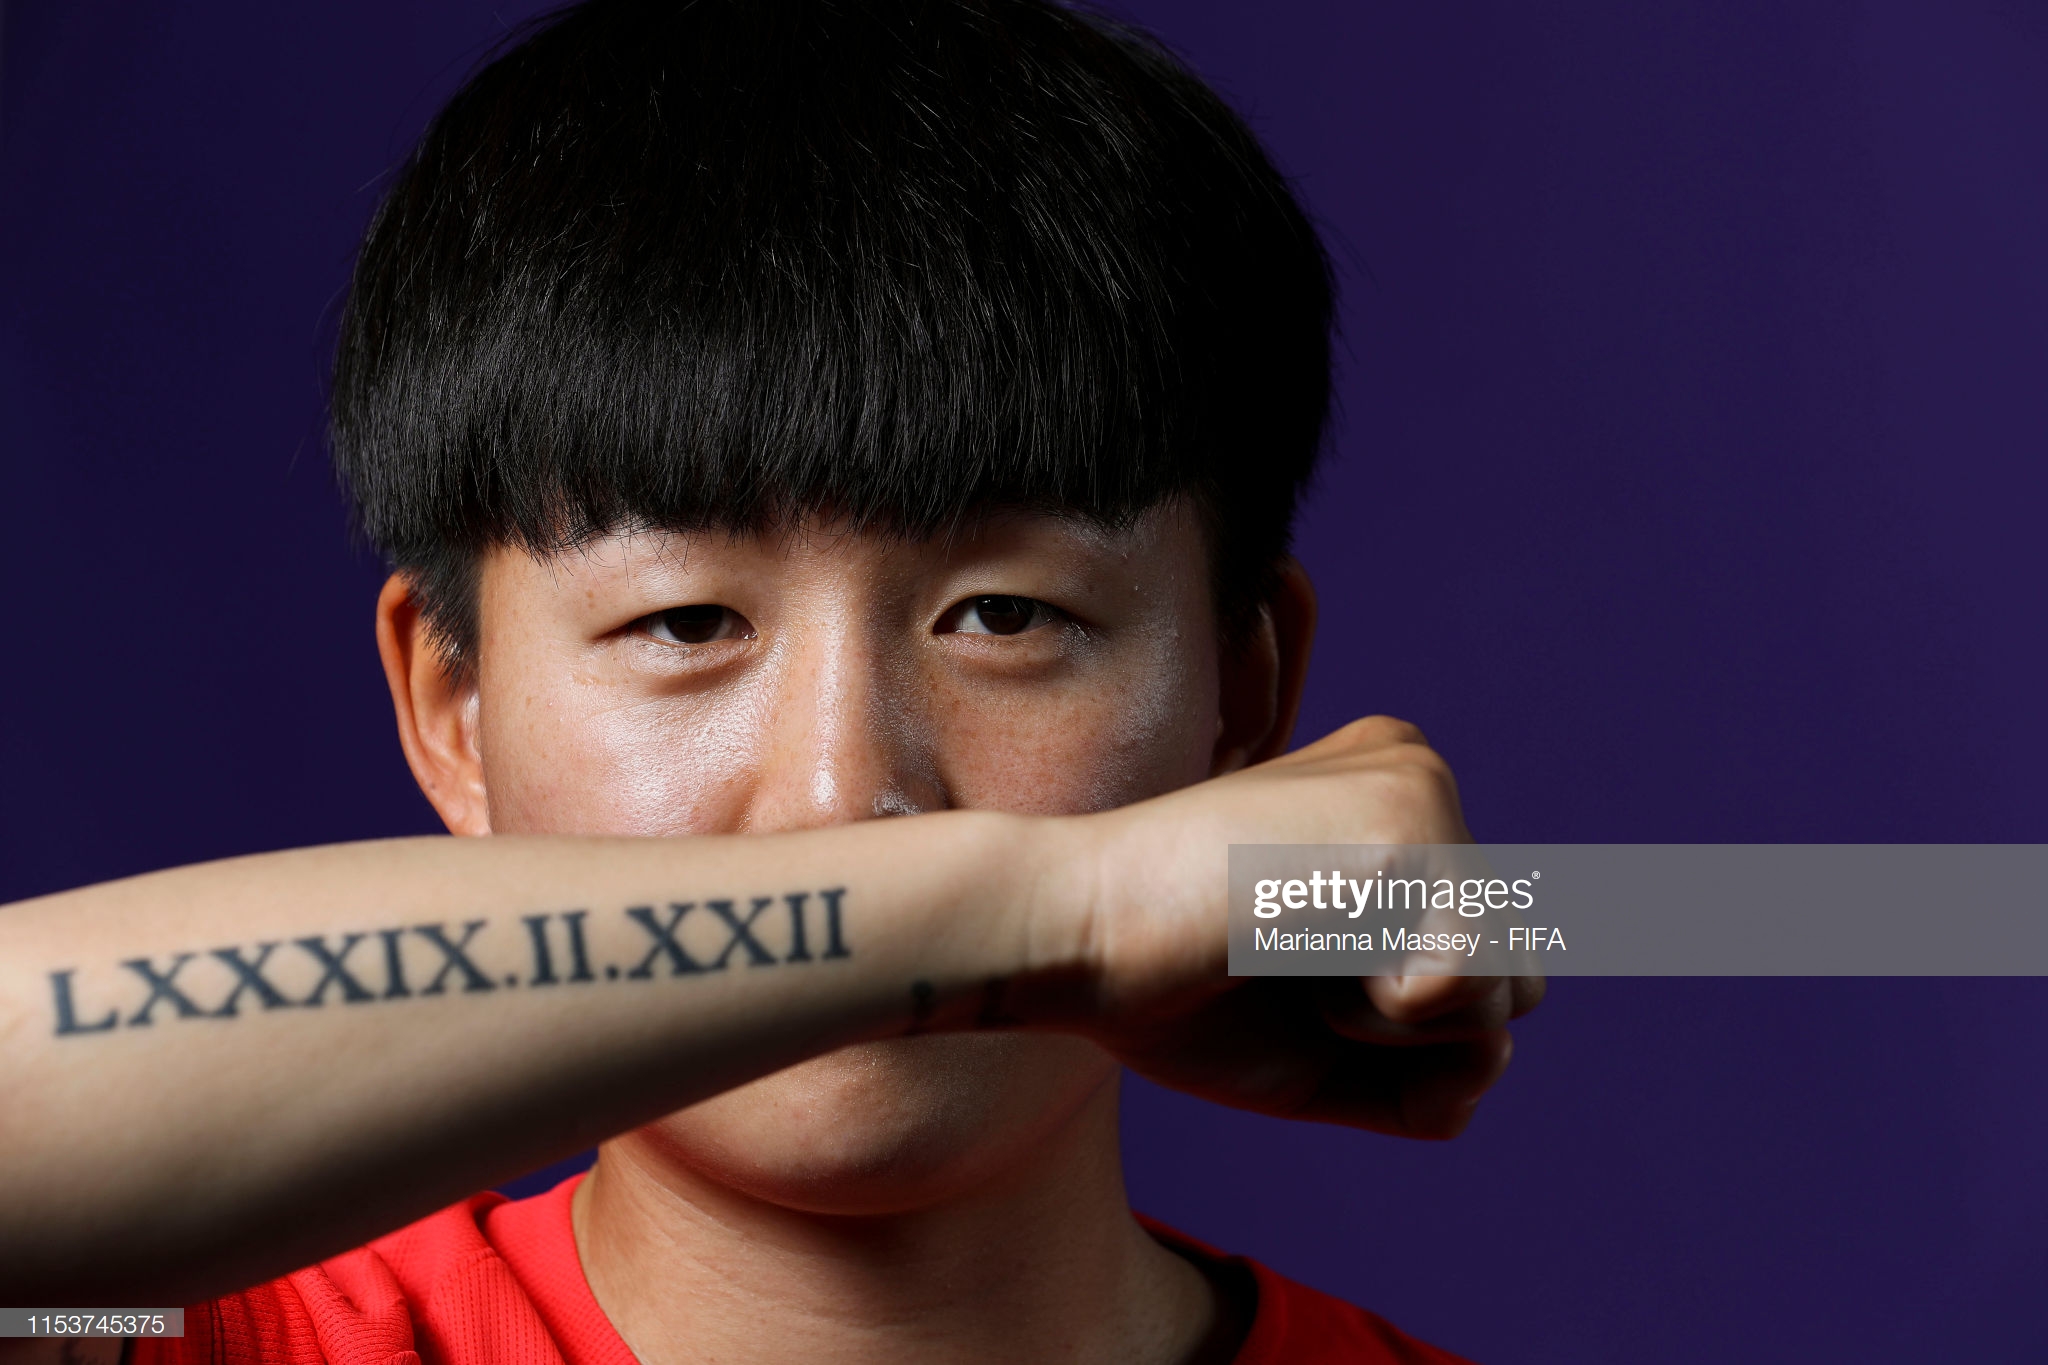 gettyimages-1153745375-2048x2048.jpg